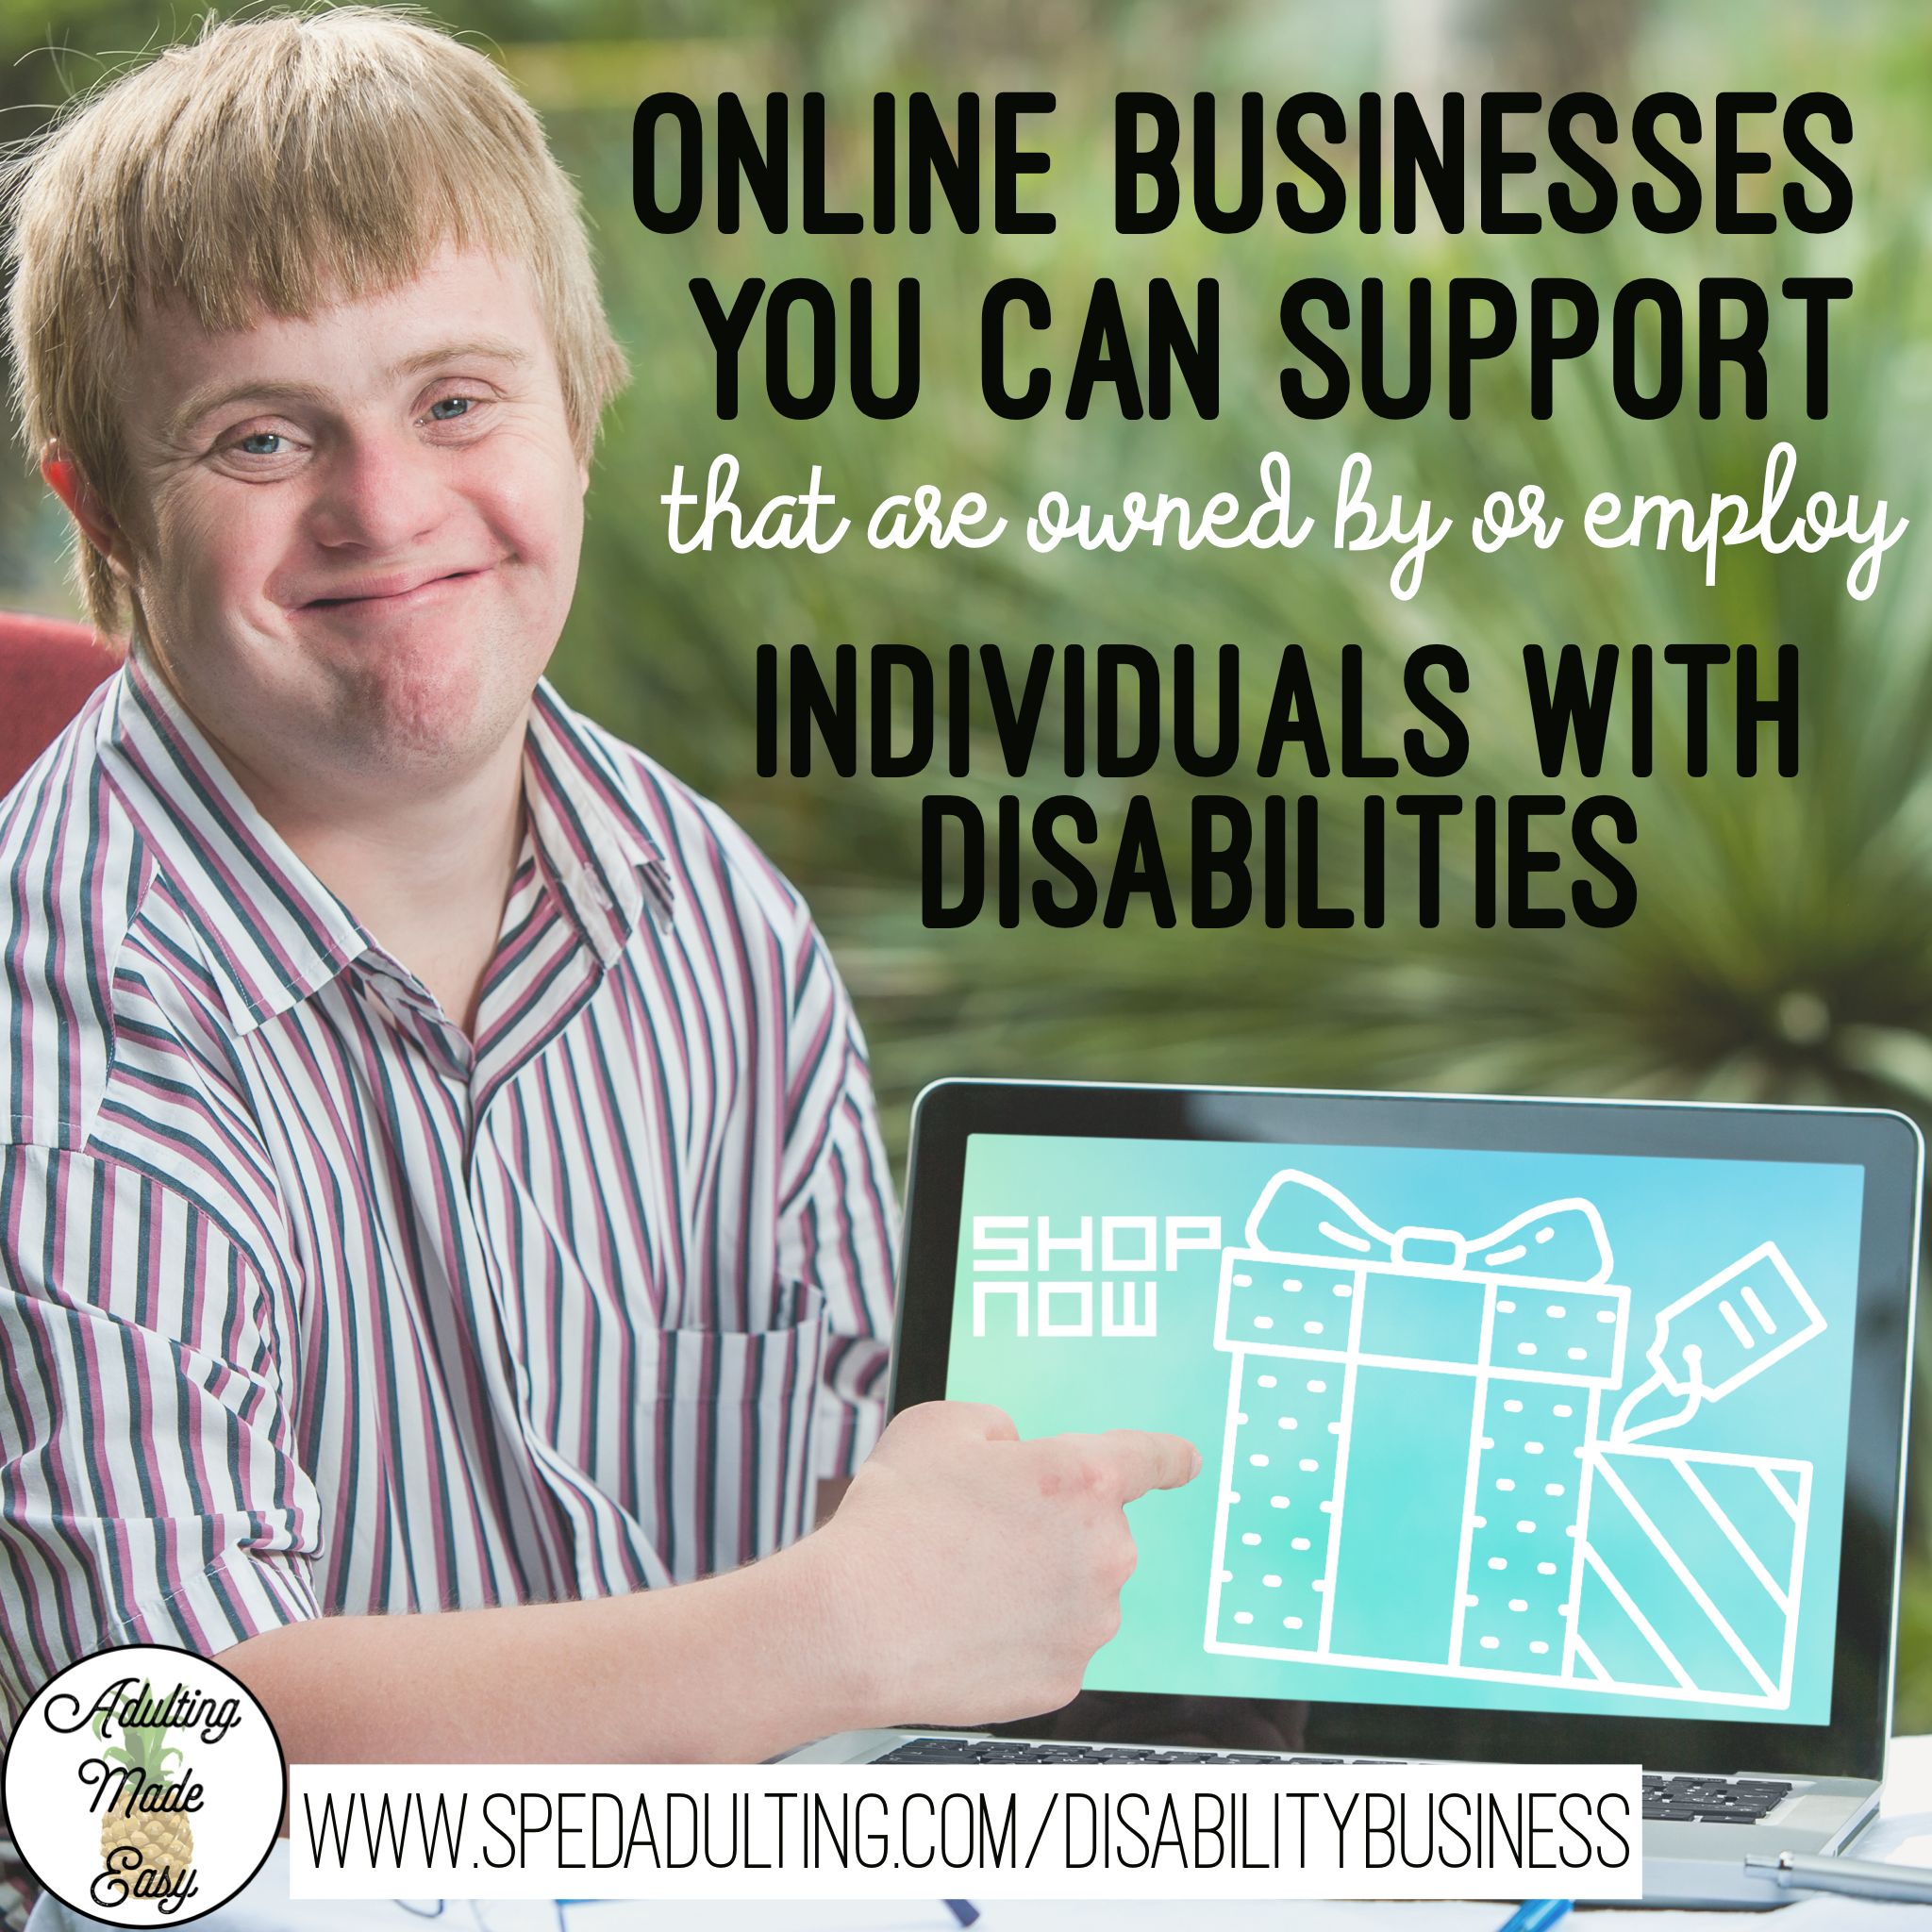 BLOG: online businesses you can support that are owned by or employe individuals with disabilities